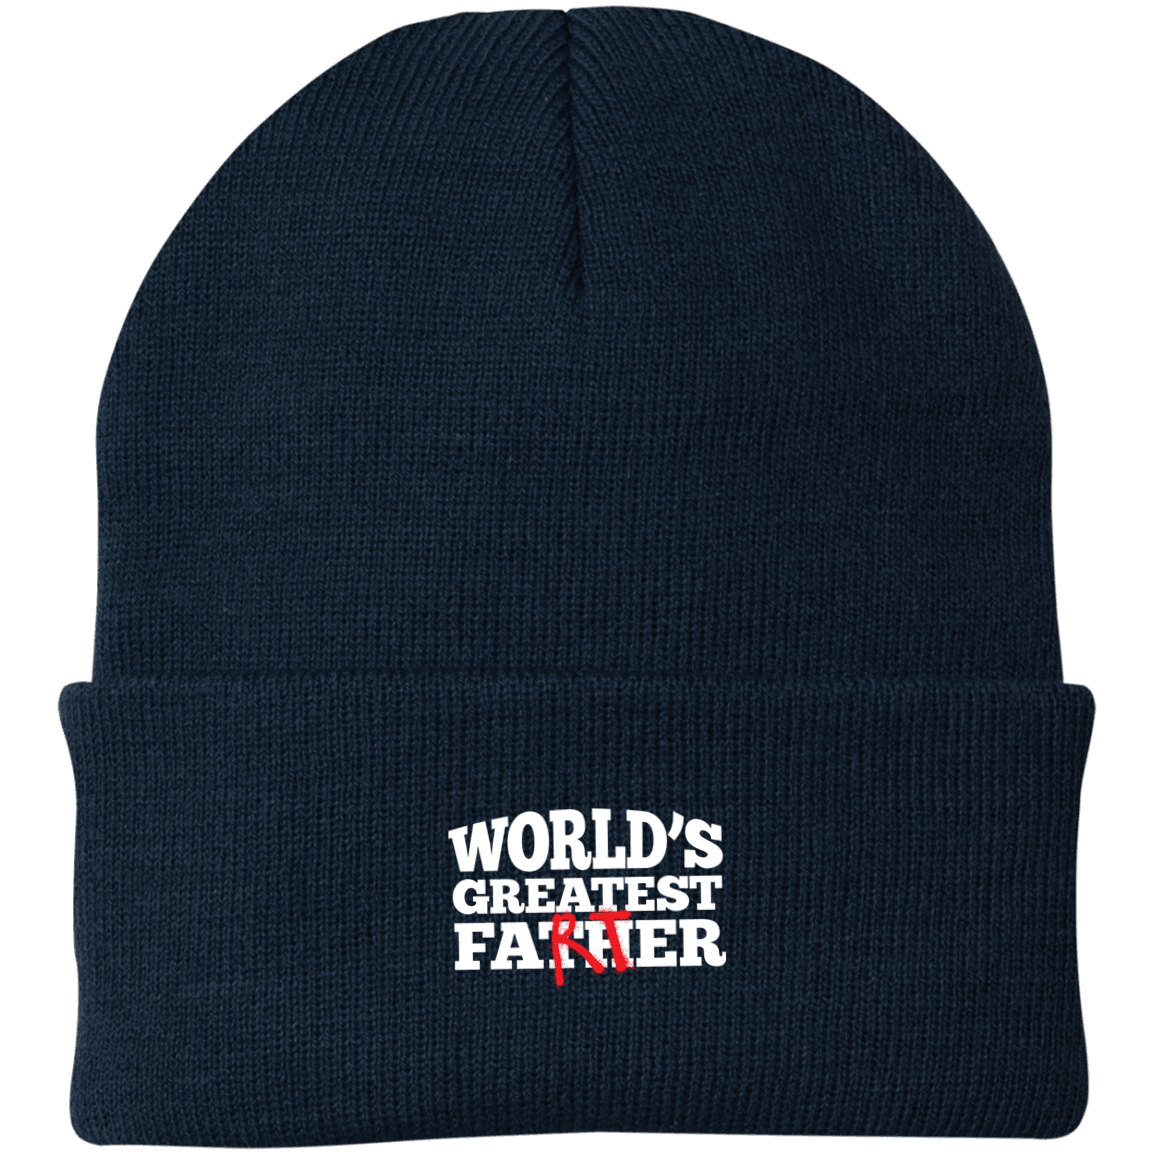 Designs by MyUtopia Shout Out:Worlds Greatest Father (Farter) Embroidered Port Authority Knit Beanie Cap - Navy Blue,Navy / One Size,Hats